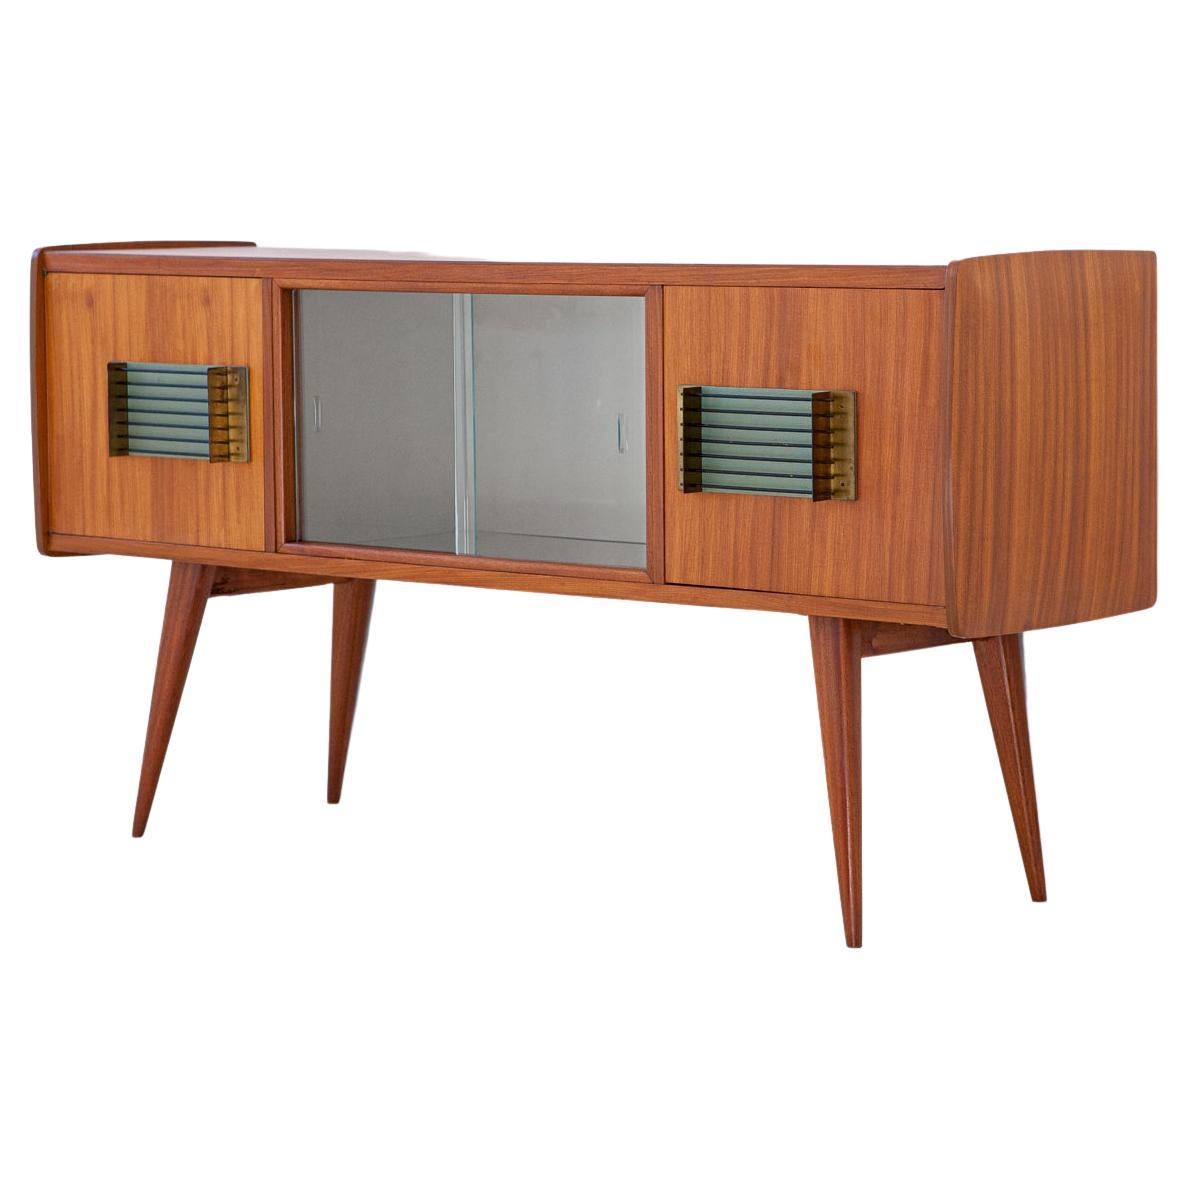 1950s Italian Teak and Brass Sideboard with Bar